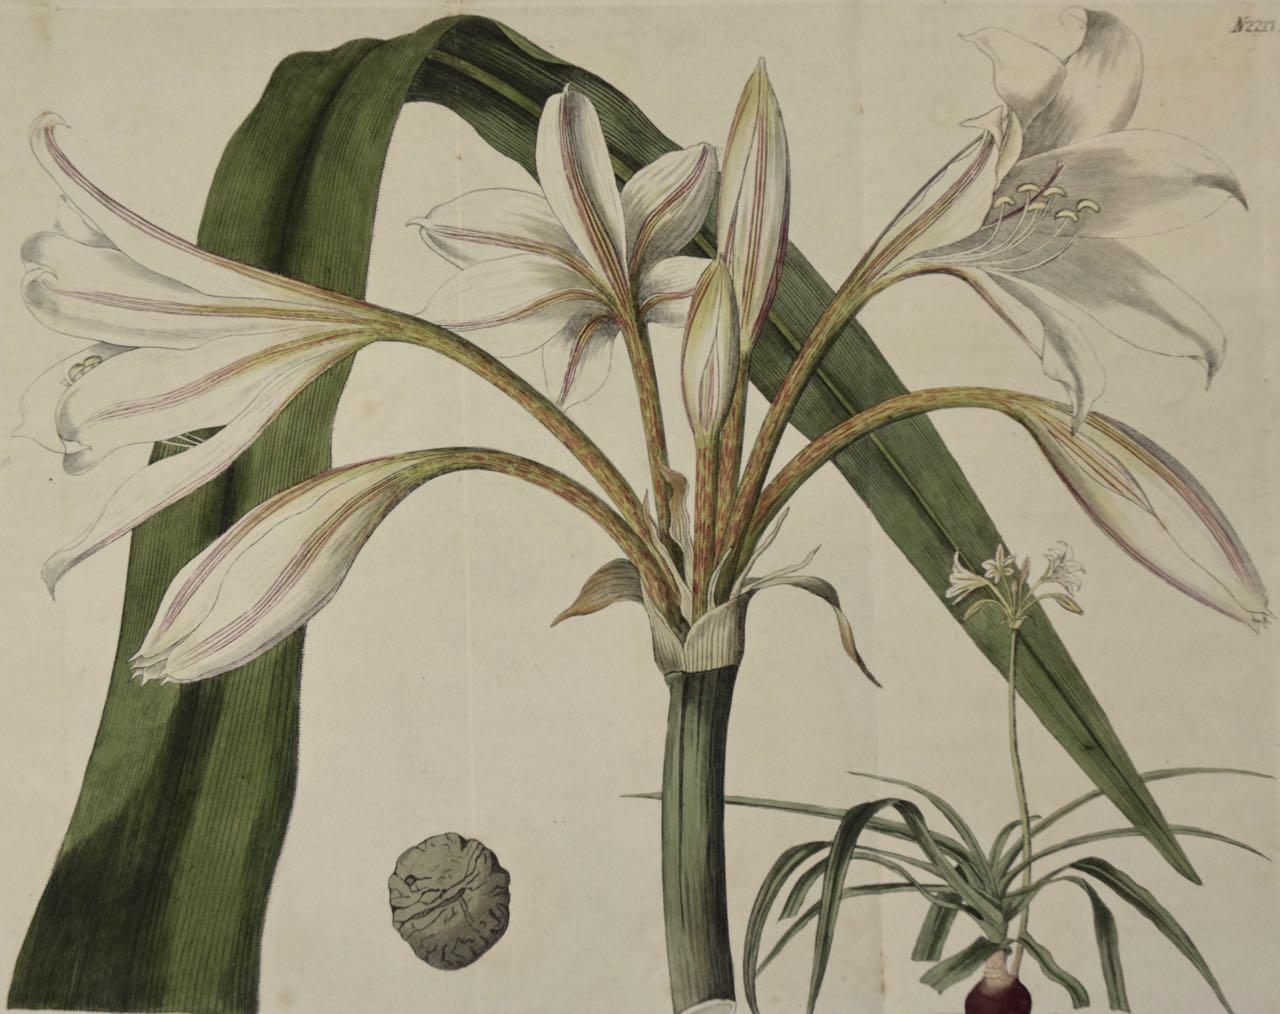 Flowering Crinum Plant: A 19th Century Hand-colored Engraving by Curtis - Print by William Curtis